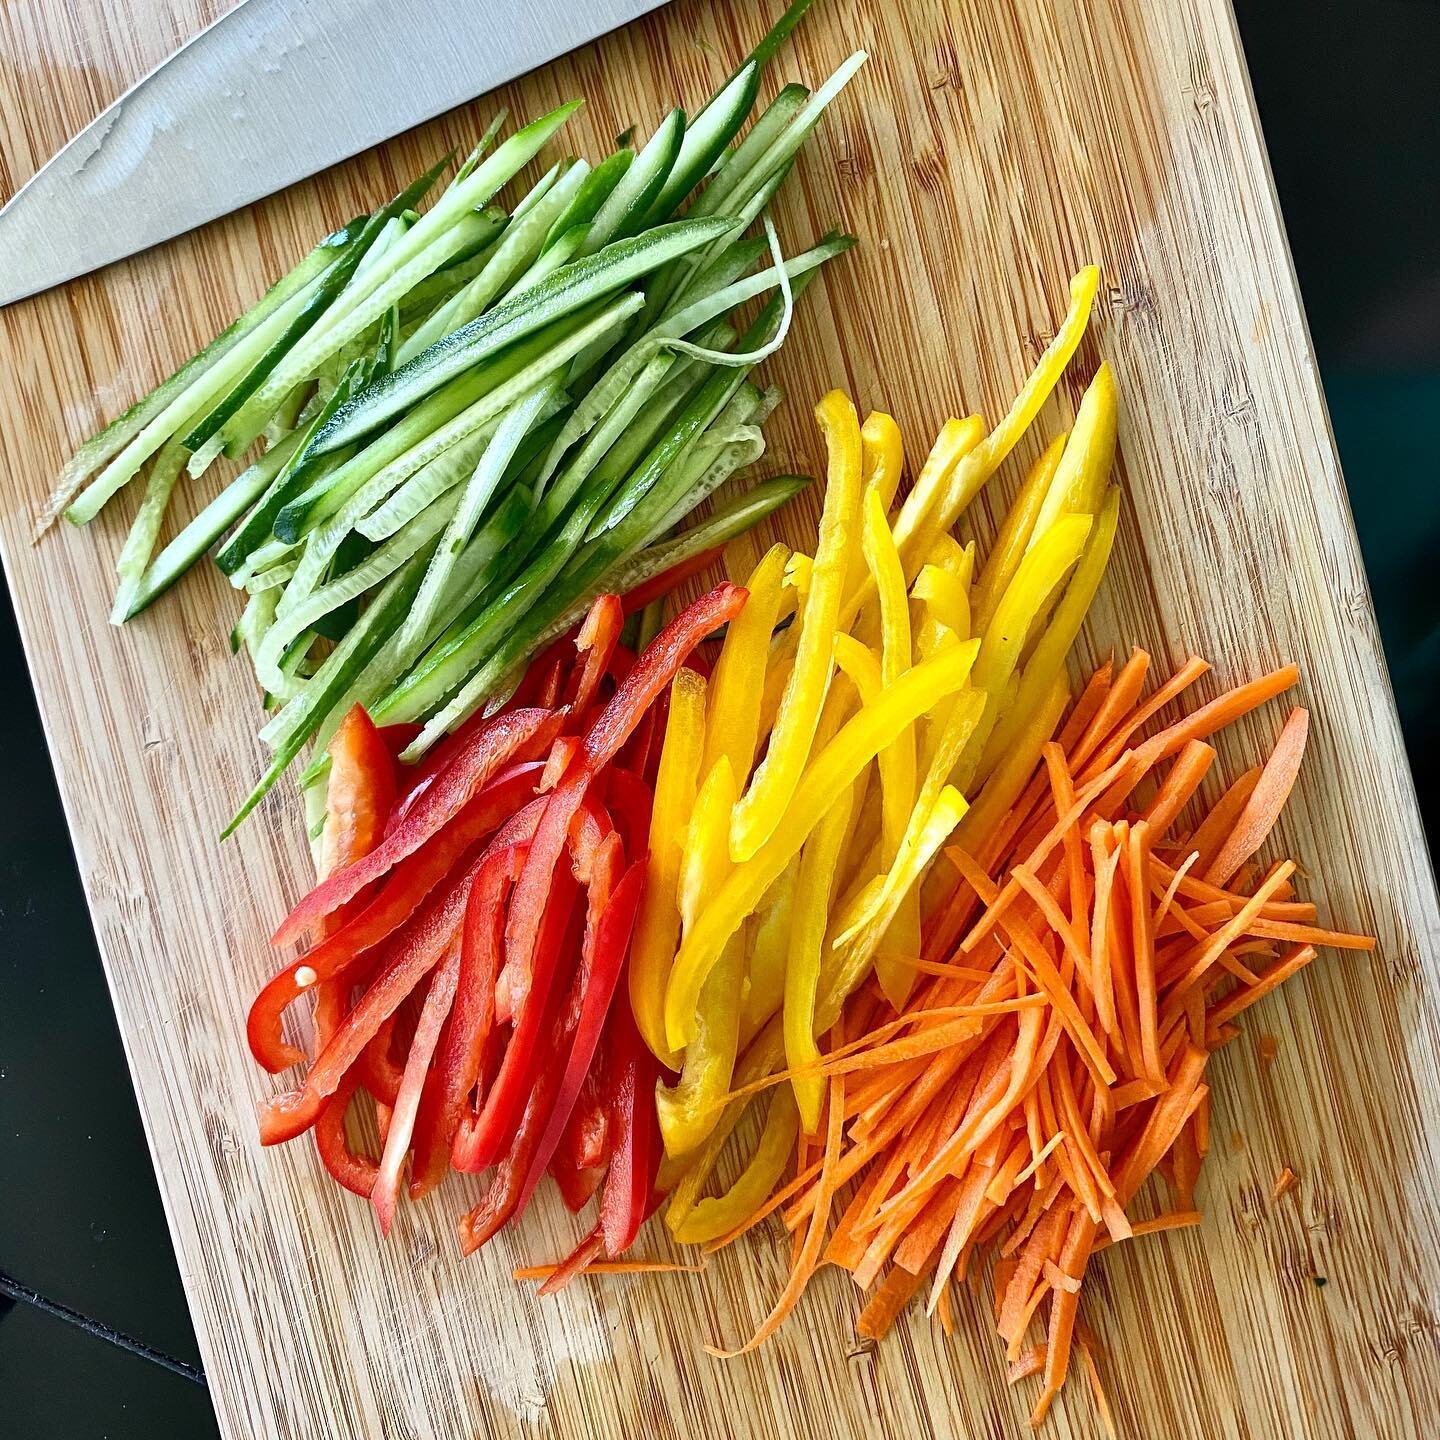 Prepping for rainbow 🌈 spring rolls.  Good opportunity to work on the julienne knife cut.  It&rsquo;s the secret to creating soft, thin, and pliable veggies so your spring roll wrapper doesn&rsquo;t break upon rolling if you tend to over stuff those